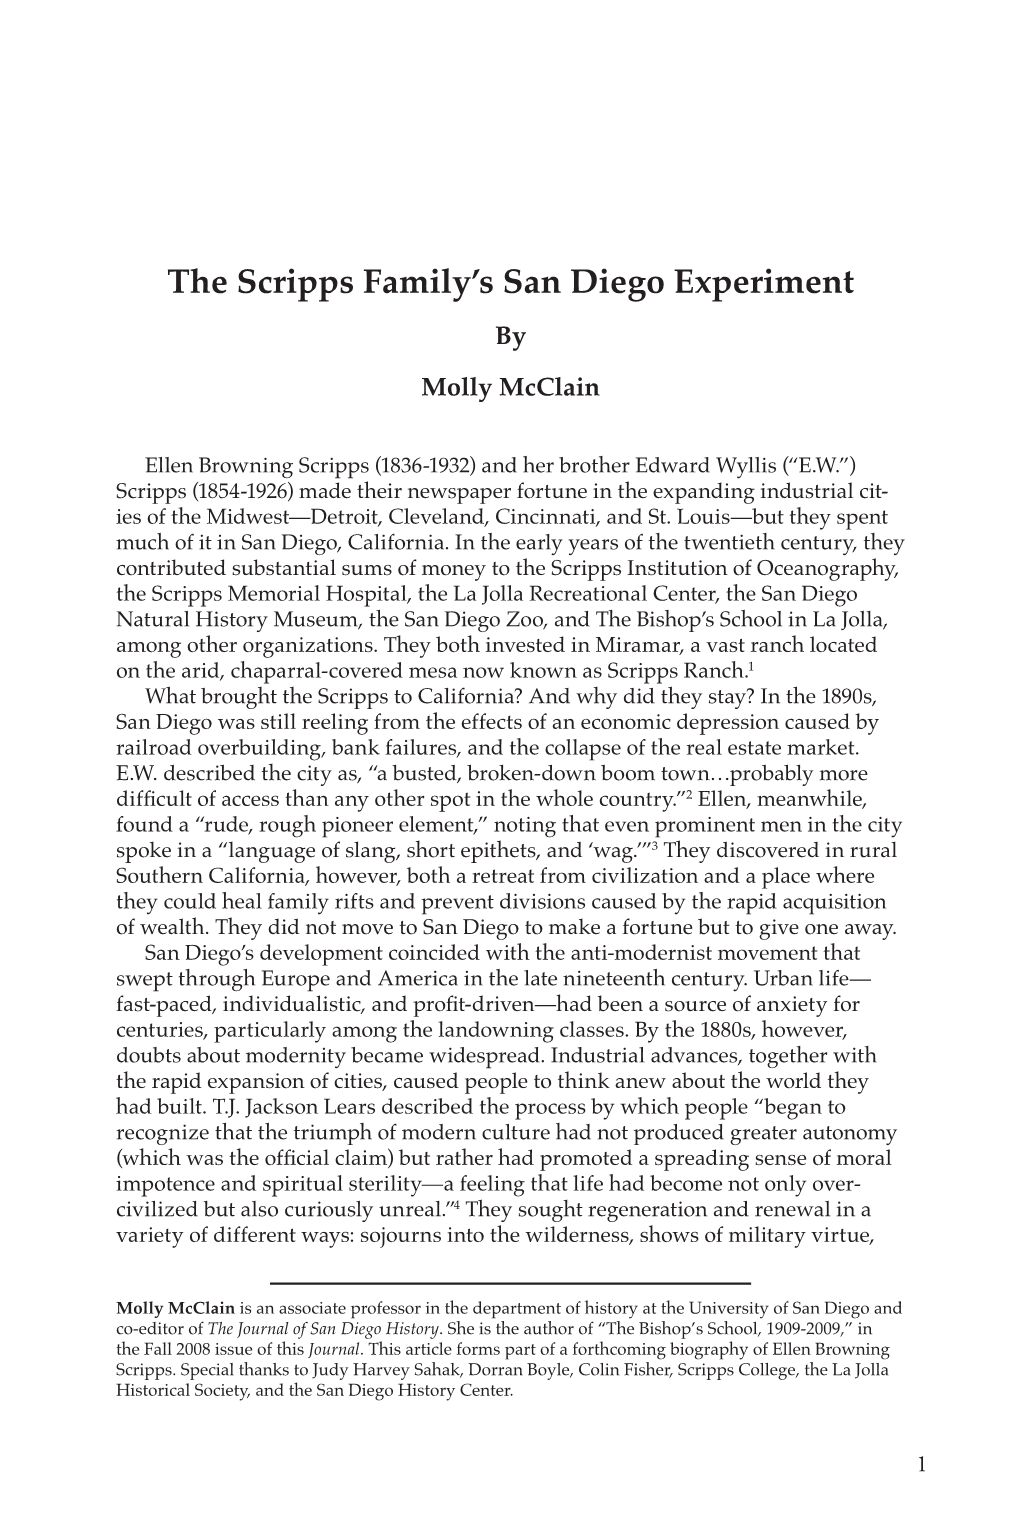 The Scripps Family's San Diego Experiment